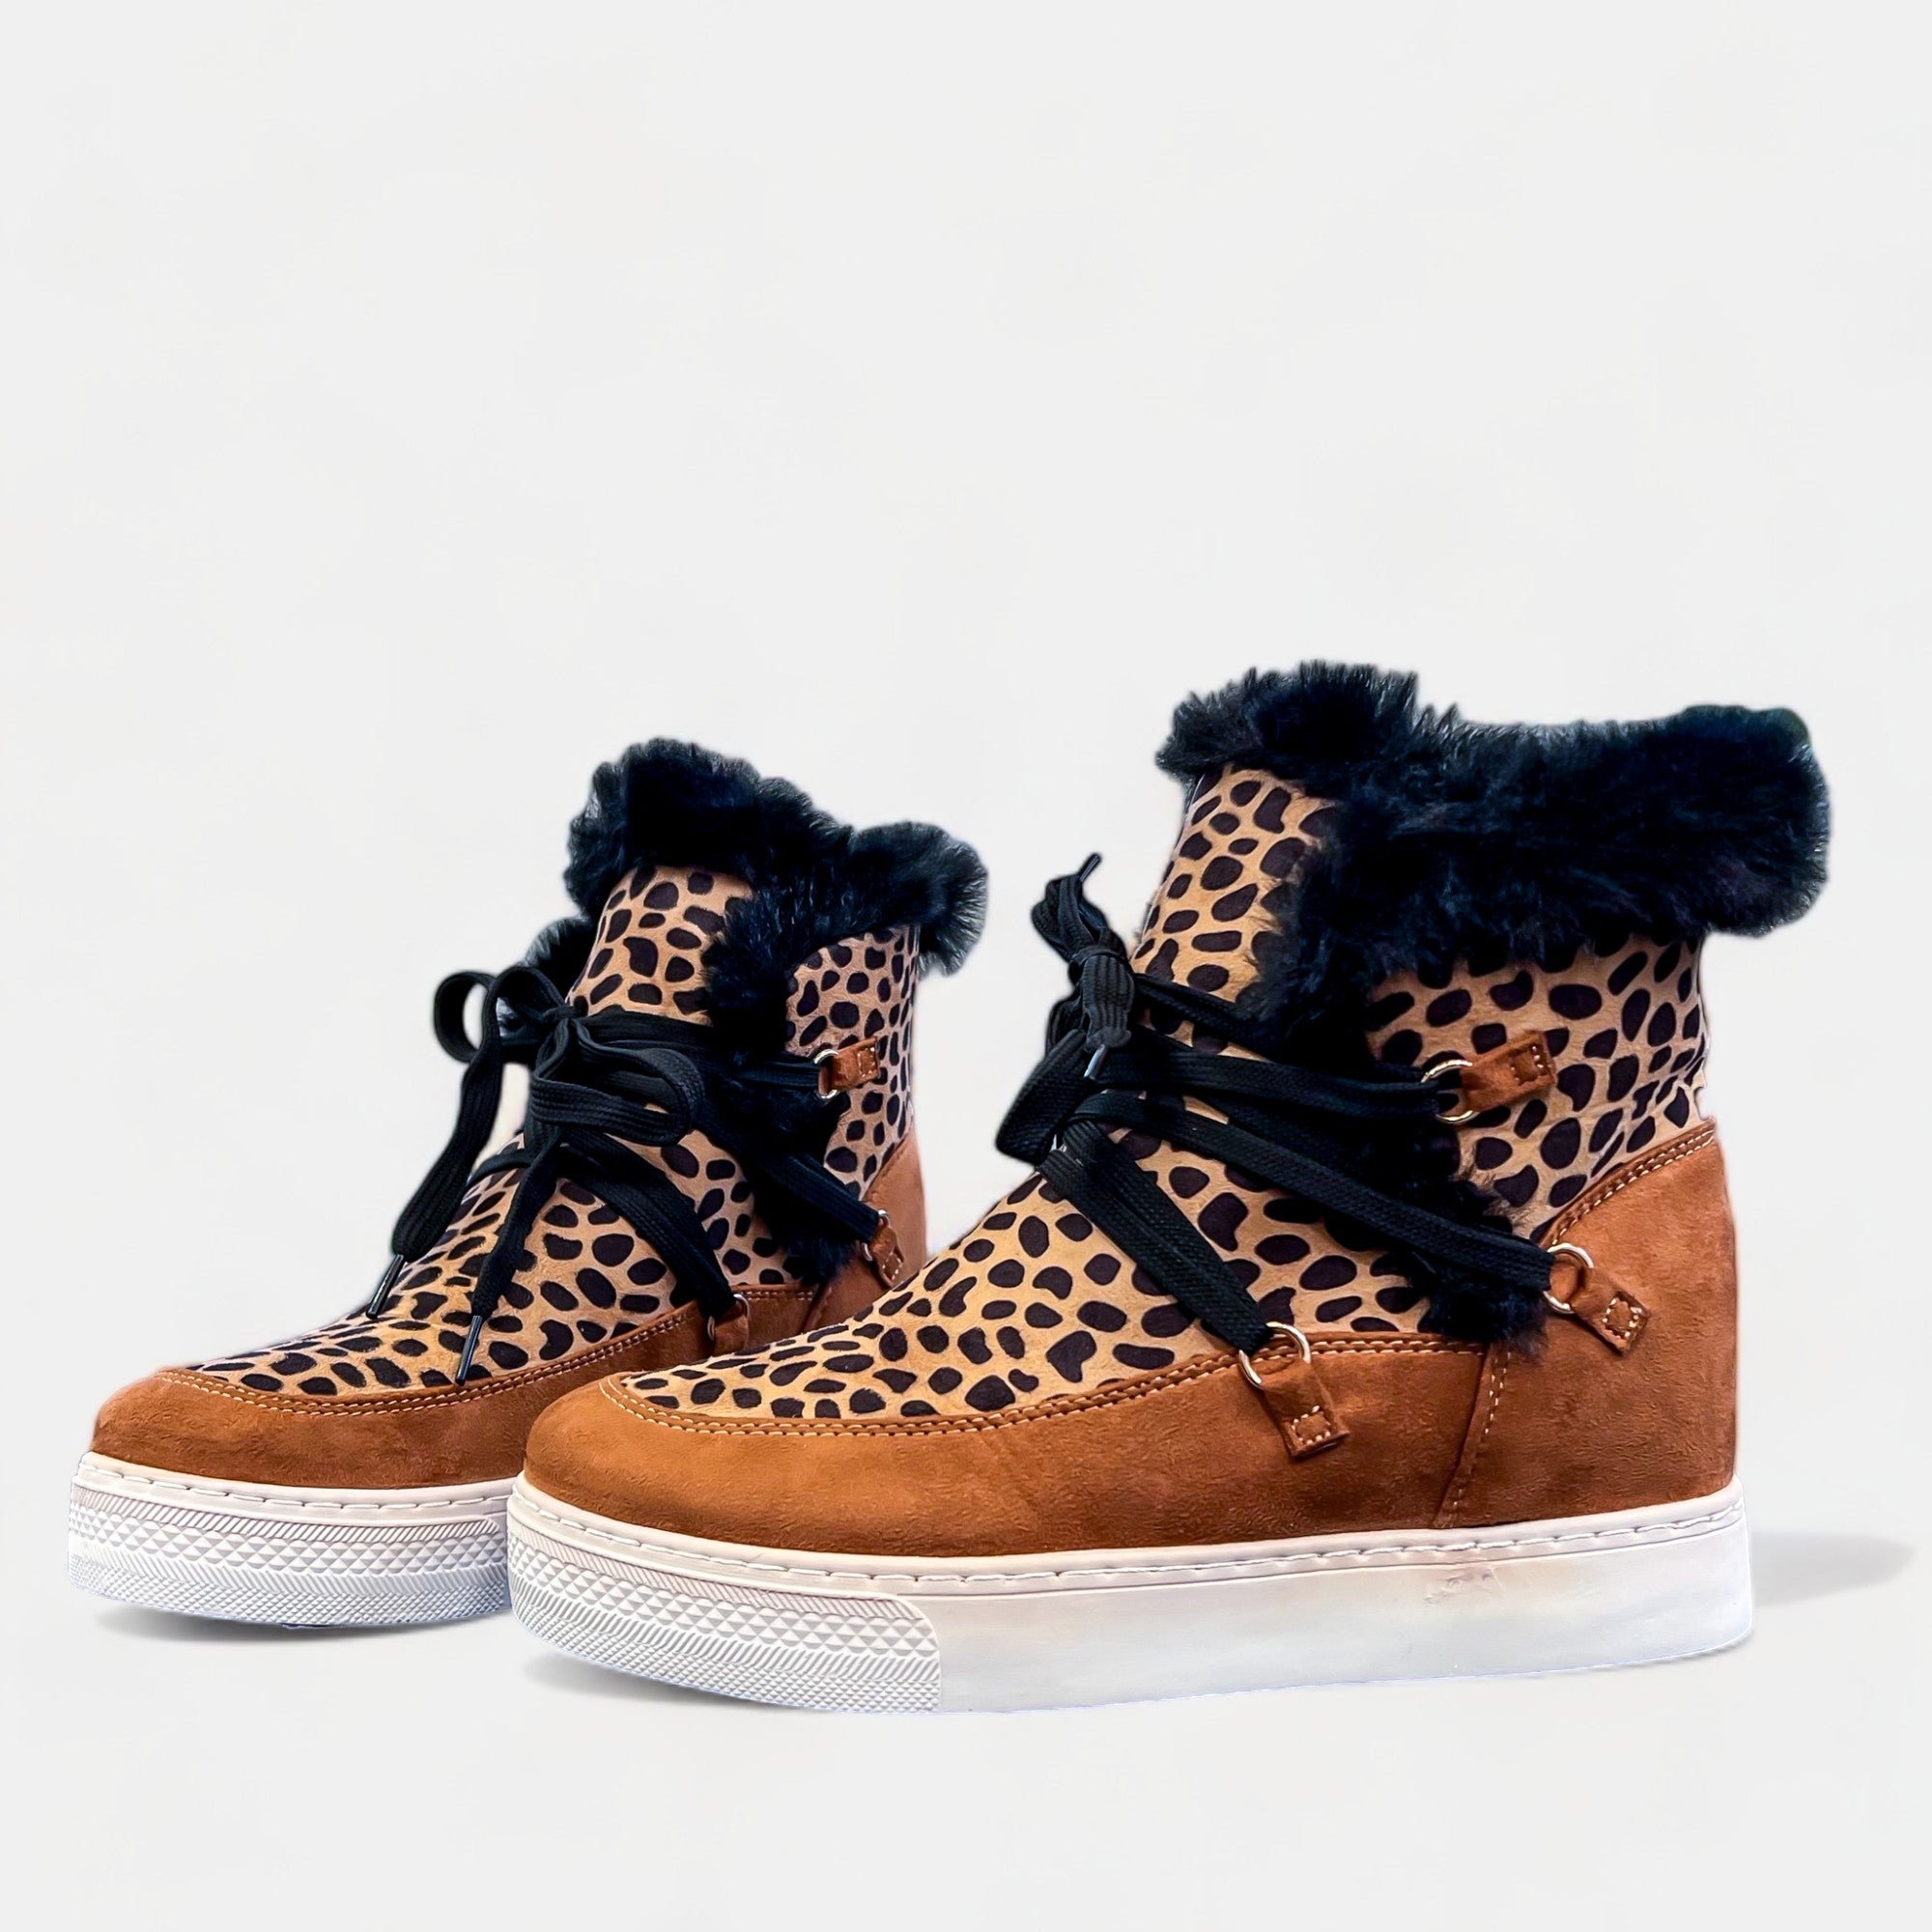 Cheetah Boots with the Fur